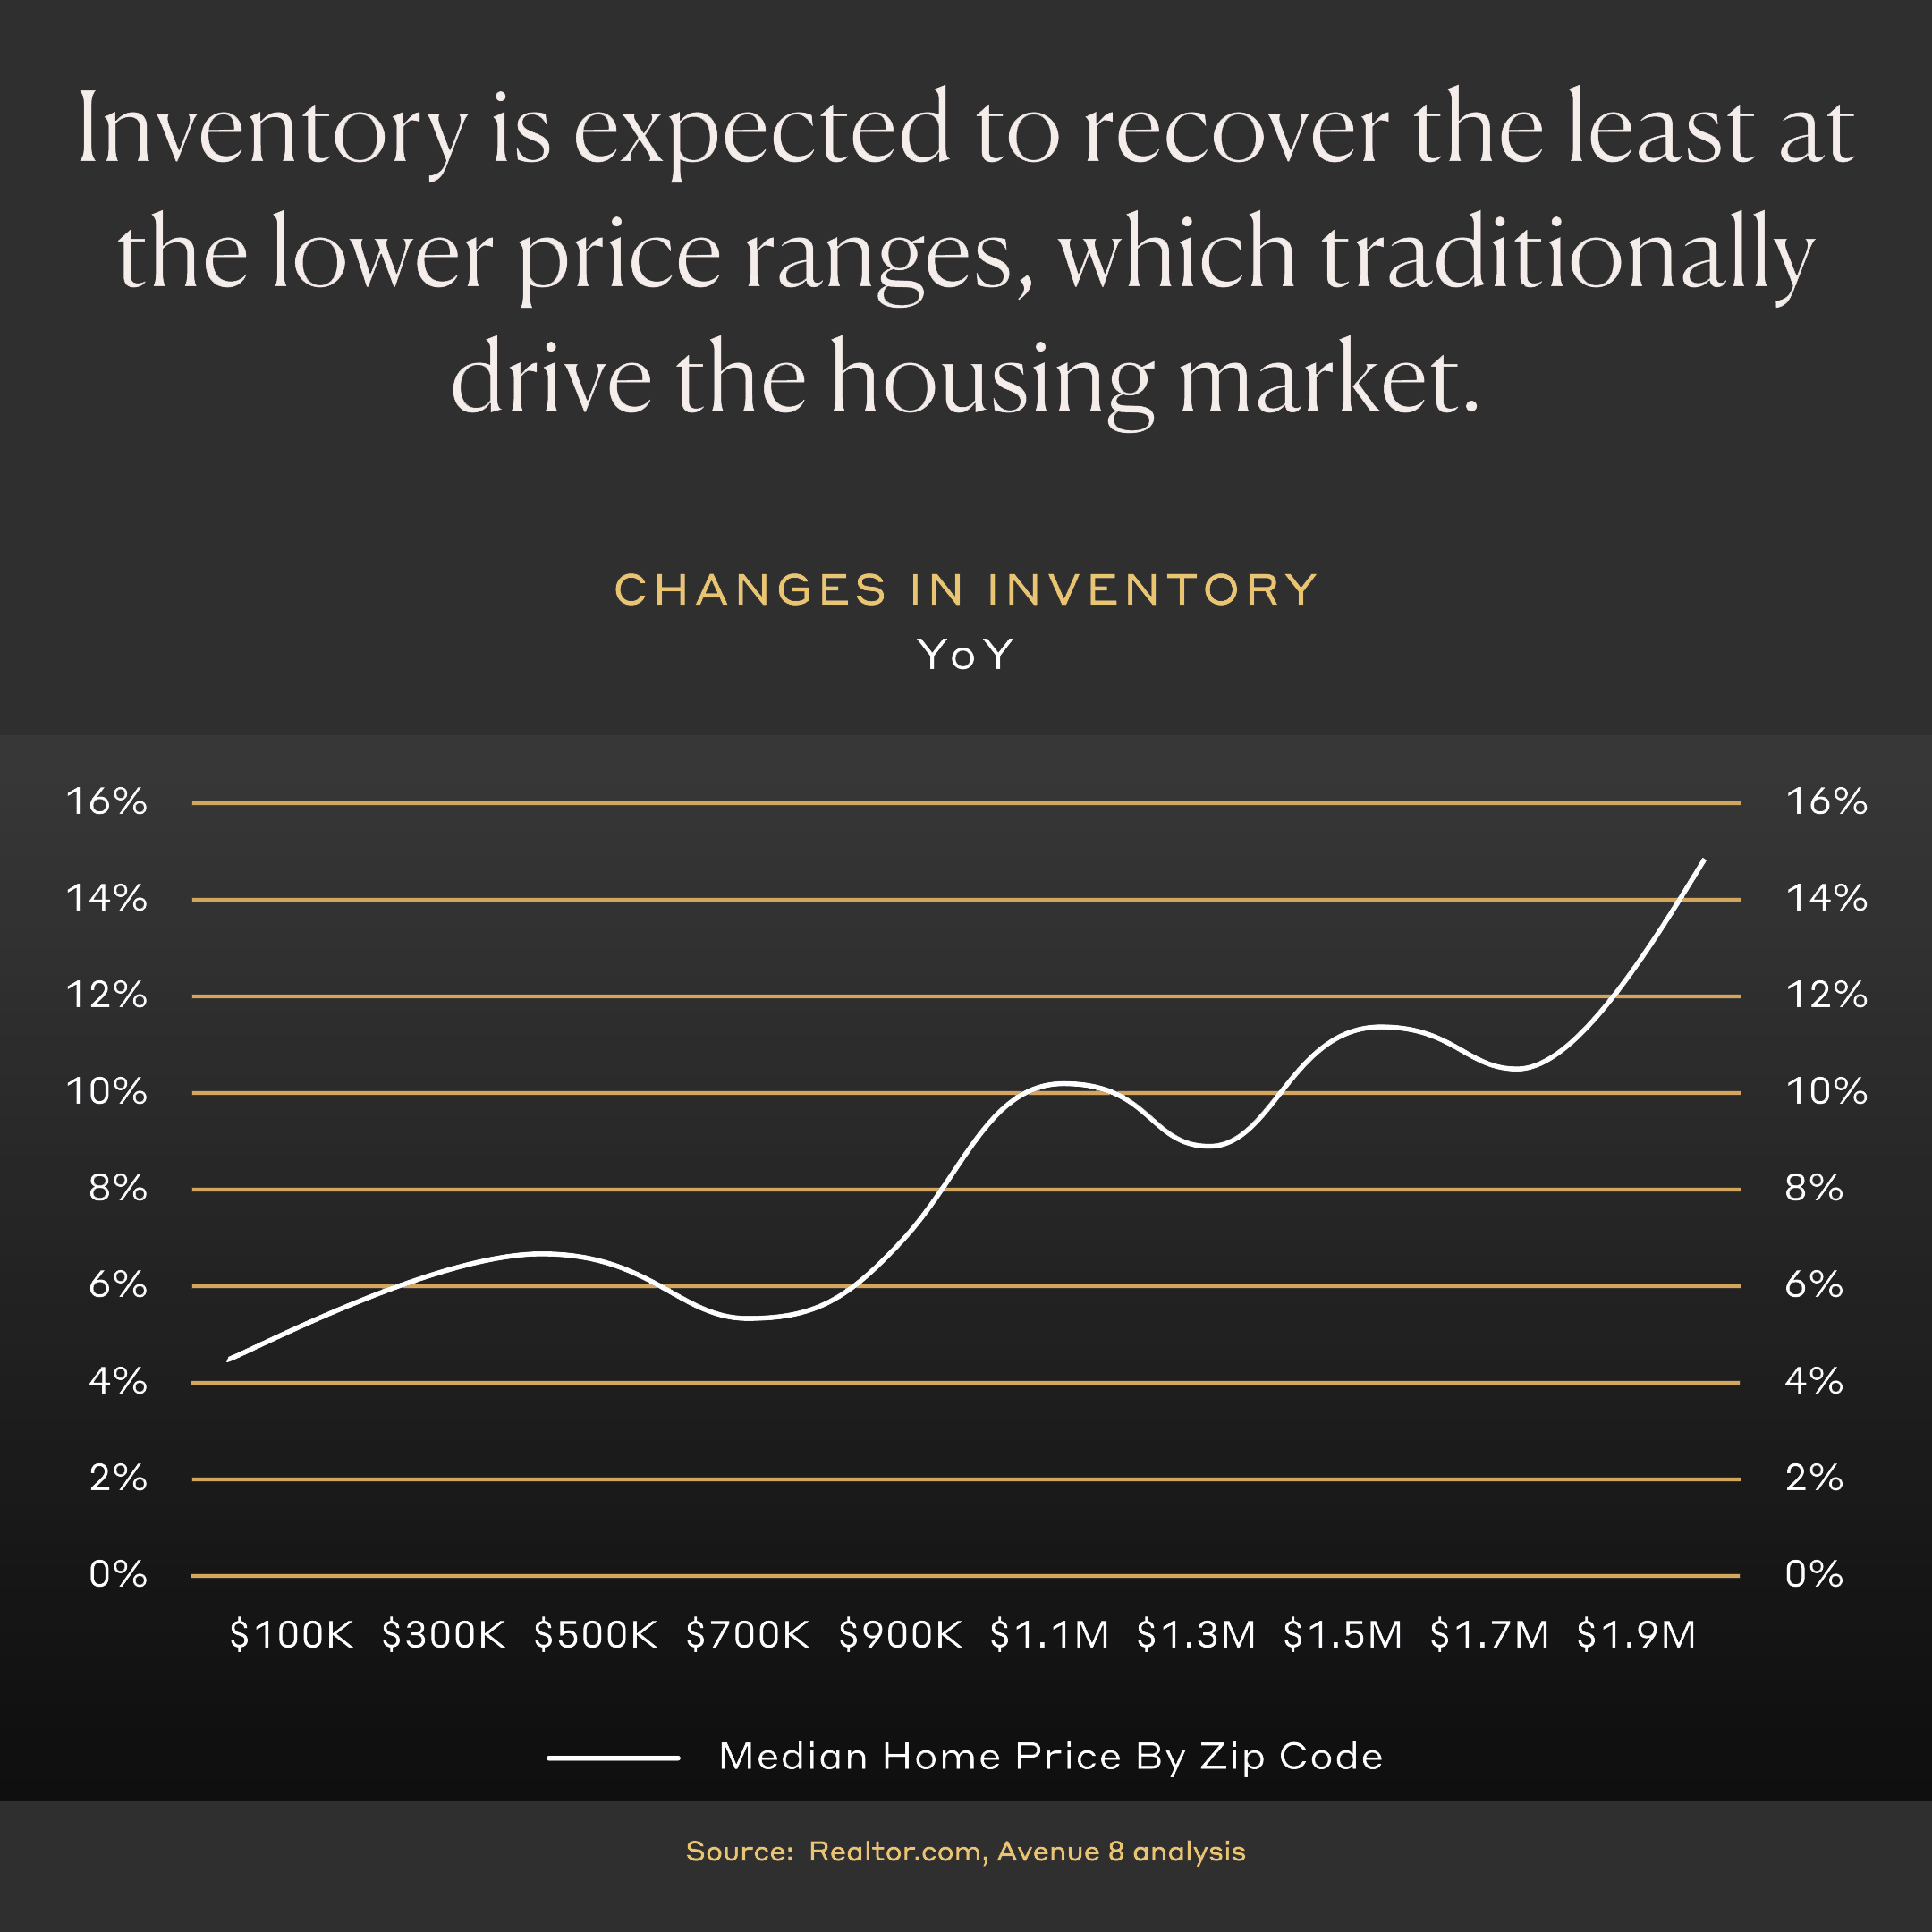 Inventory is expected to recover the least at the lower price ranges, which traditionally drive the housing market.